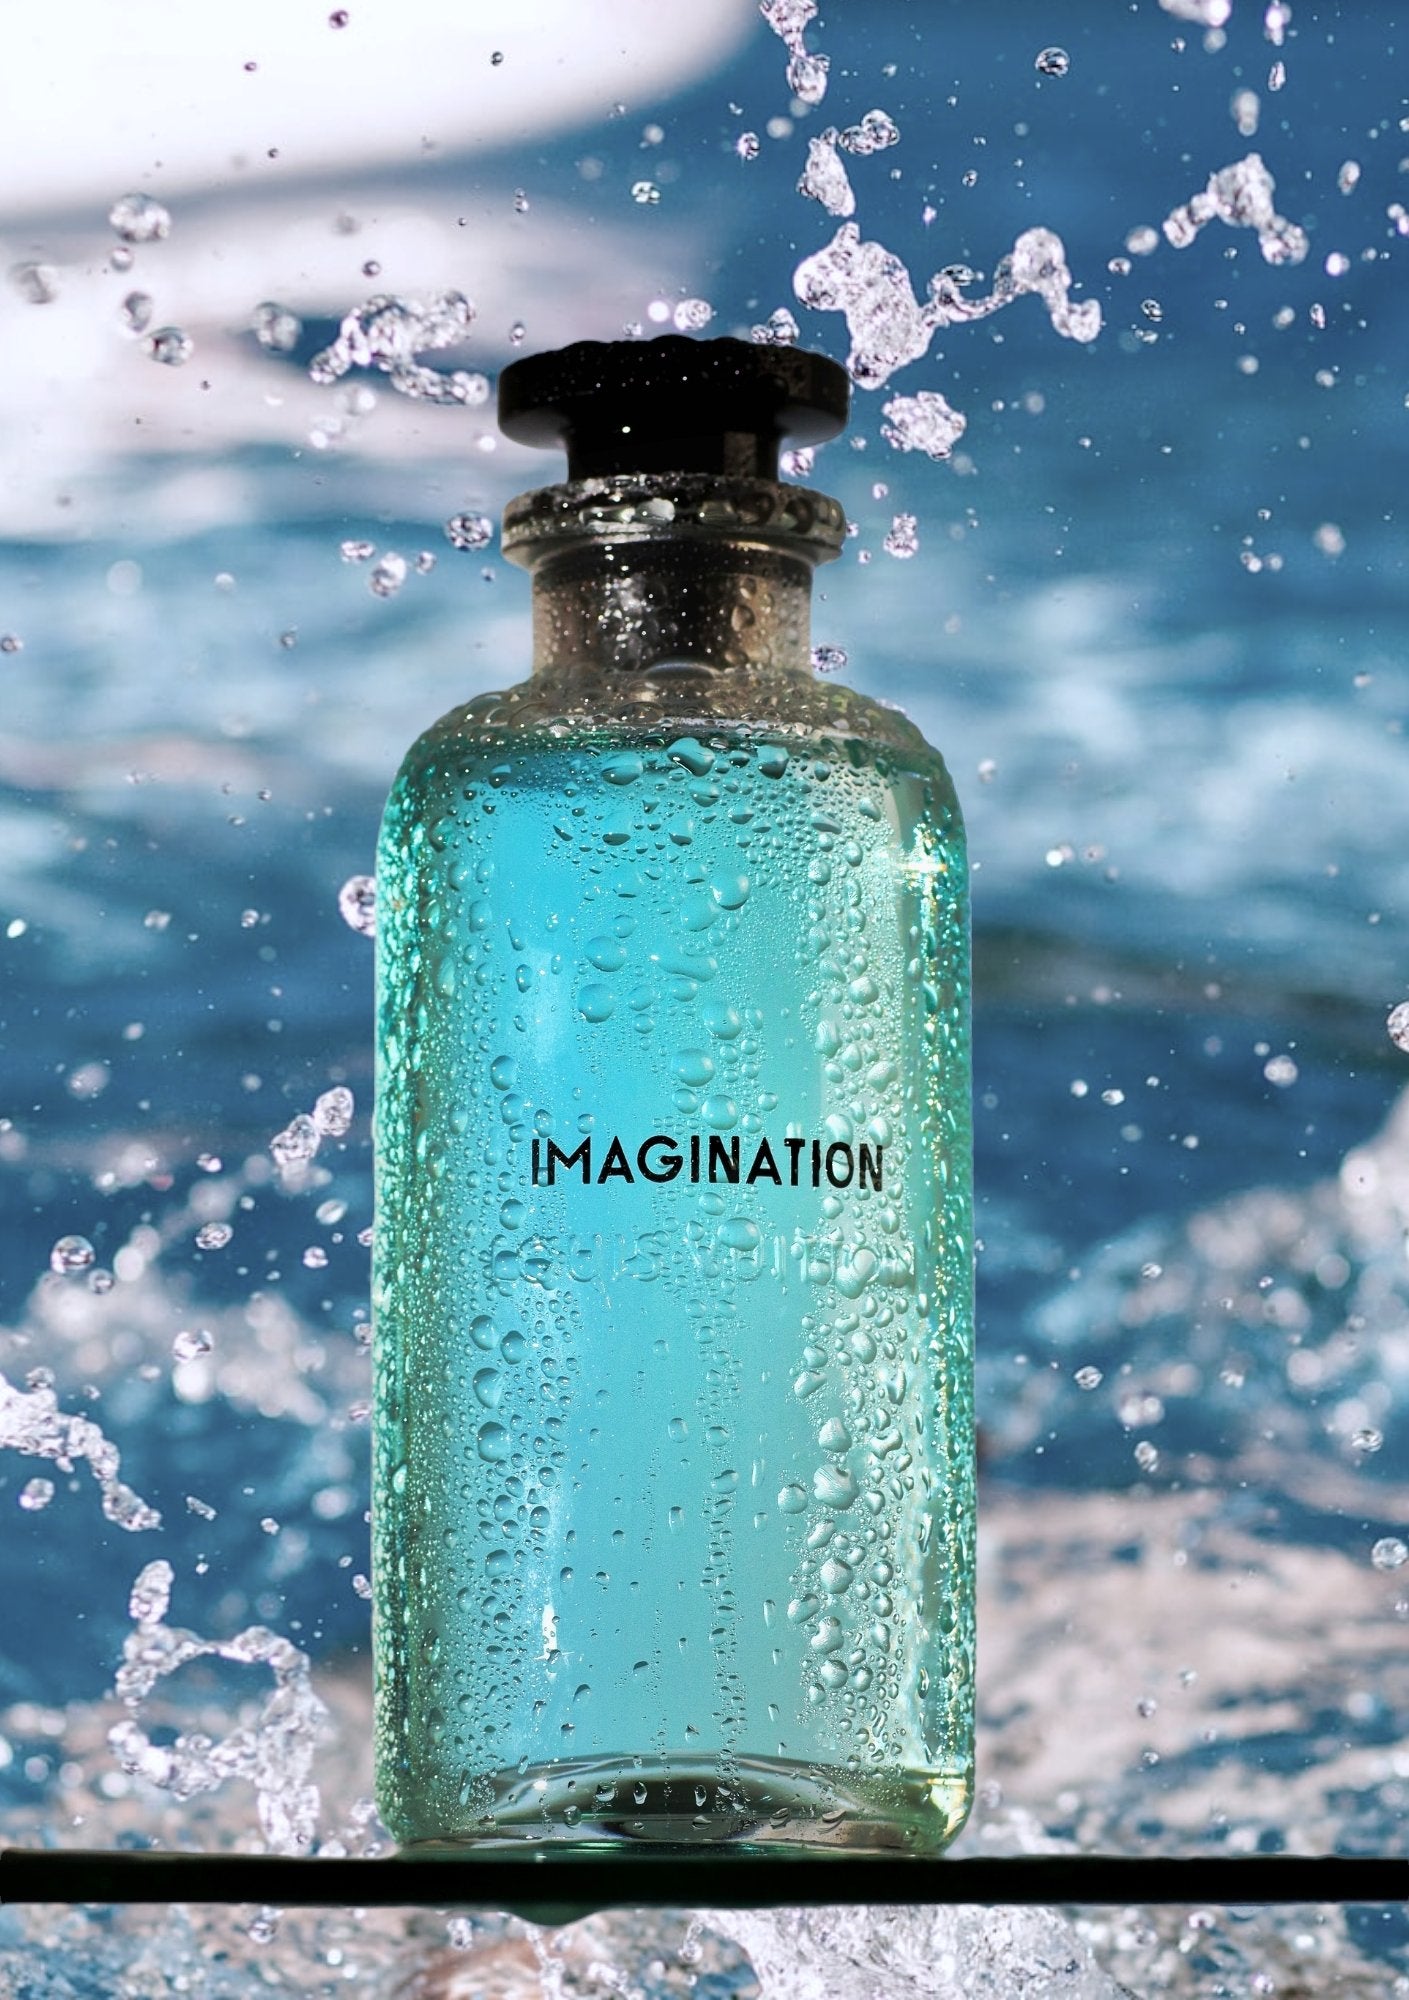 LOUIS VUITTON IMAGINATION 💭 FRAGRANCE REVIEW  A FRESH AND SWEET FRAGRANCE  WITH BLACK TEA ☕️ 